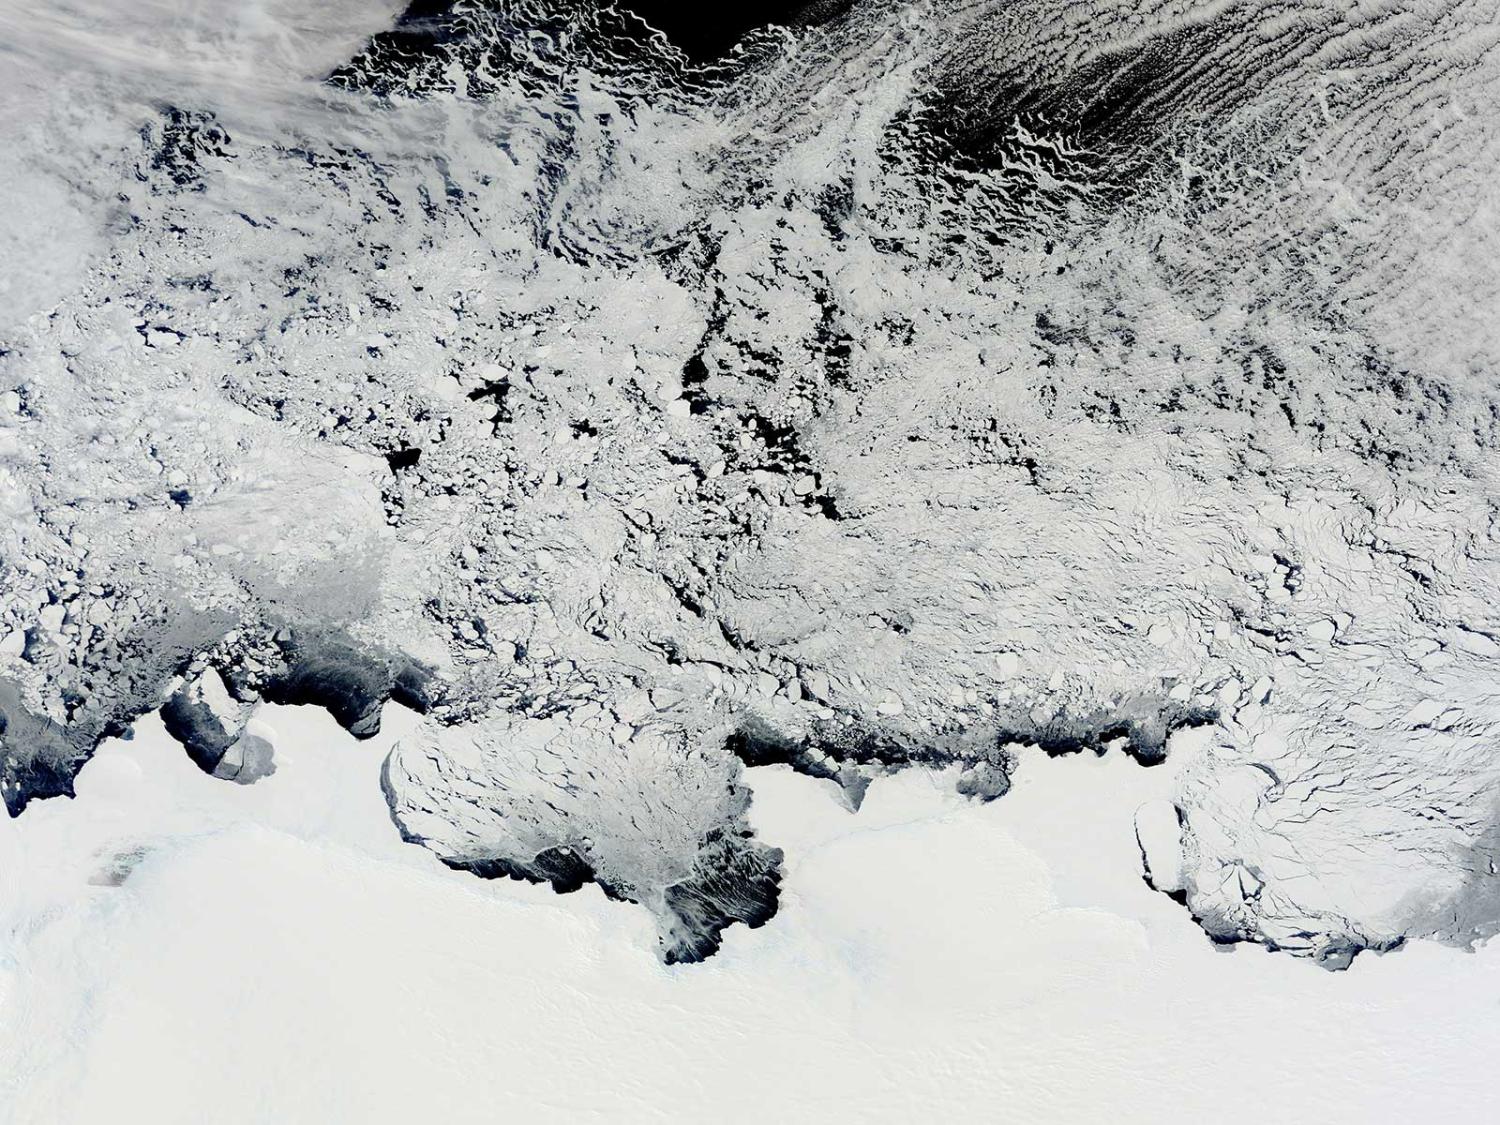 China’s is operating at the highest point of the Antarctic ice sheet (Photo: NASA/Flickr)